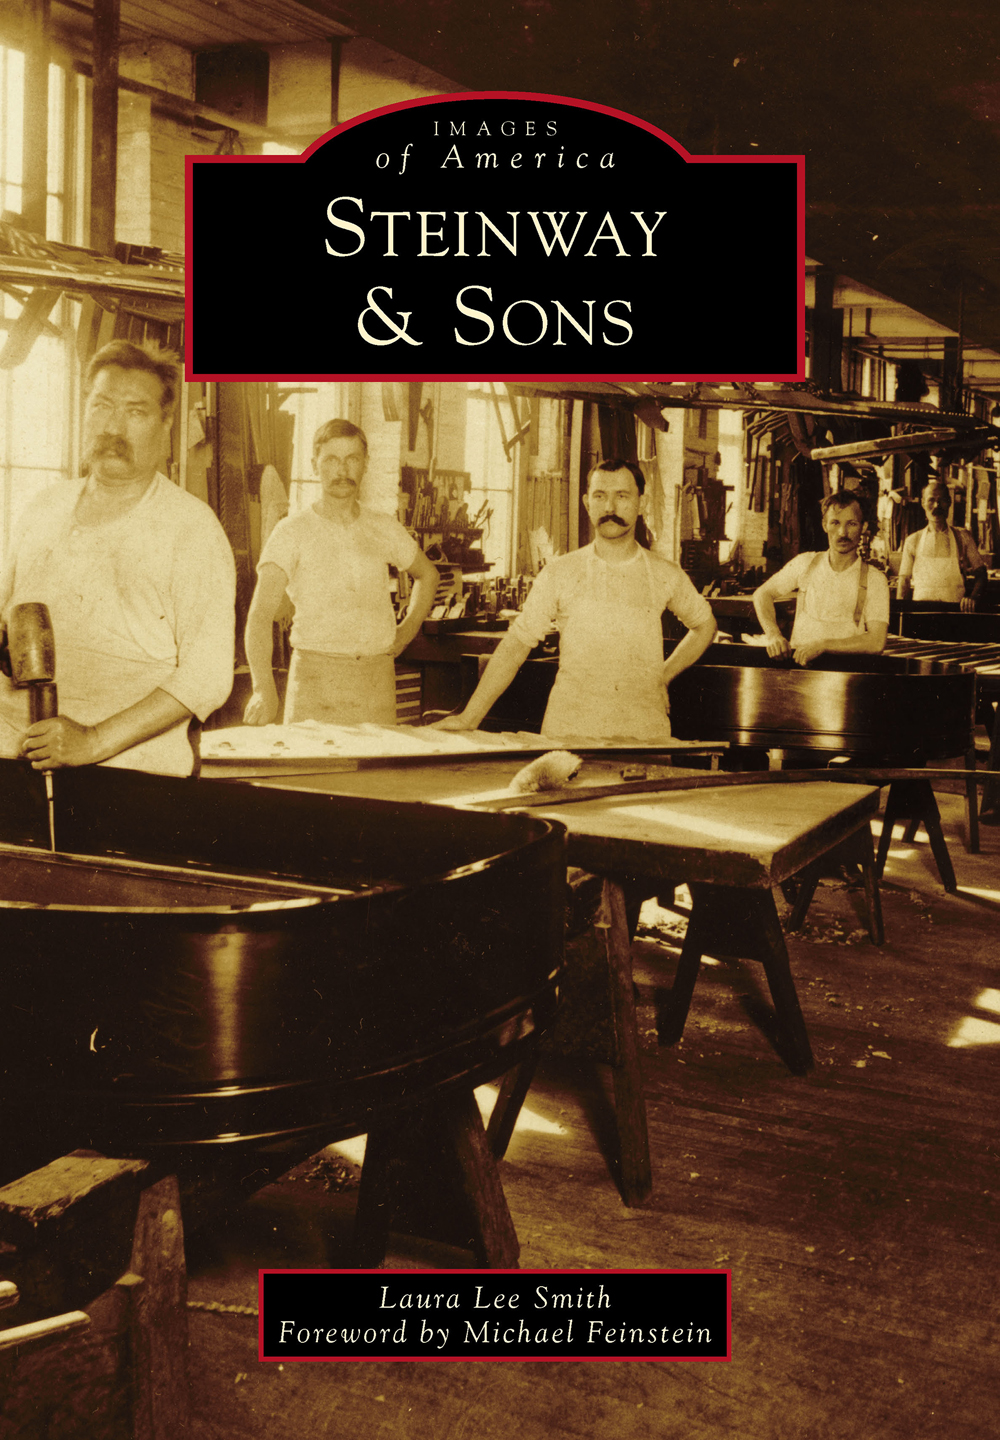 This image is the cover for the book Steinway & Sons, Images of America